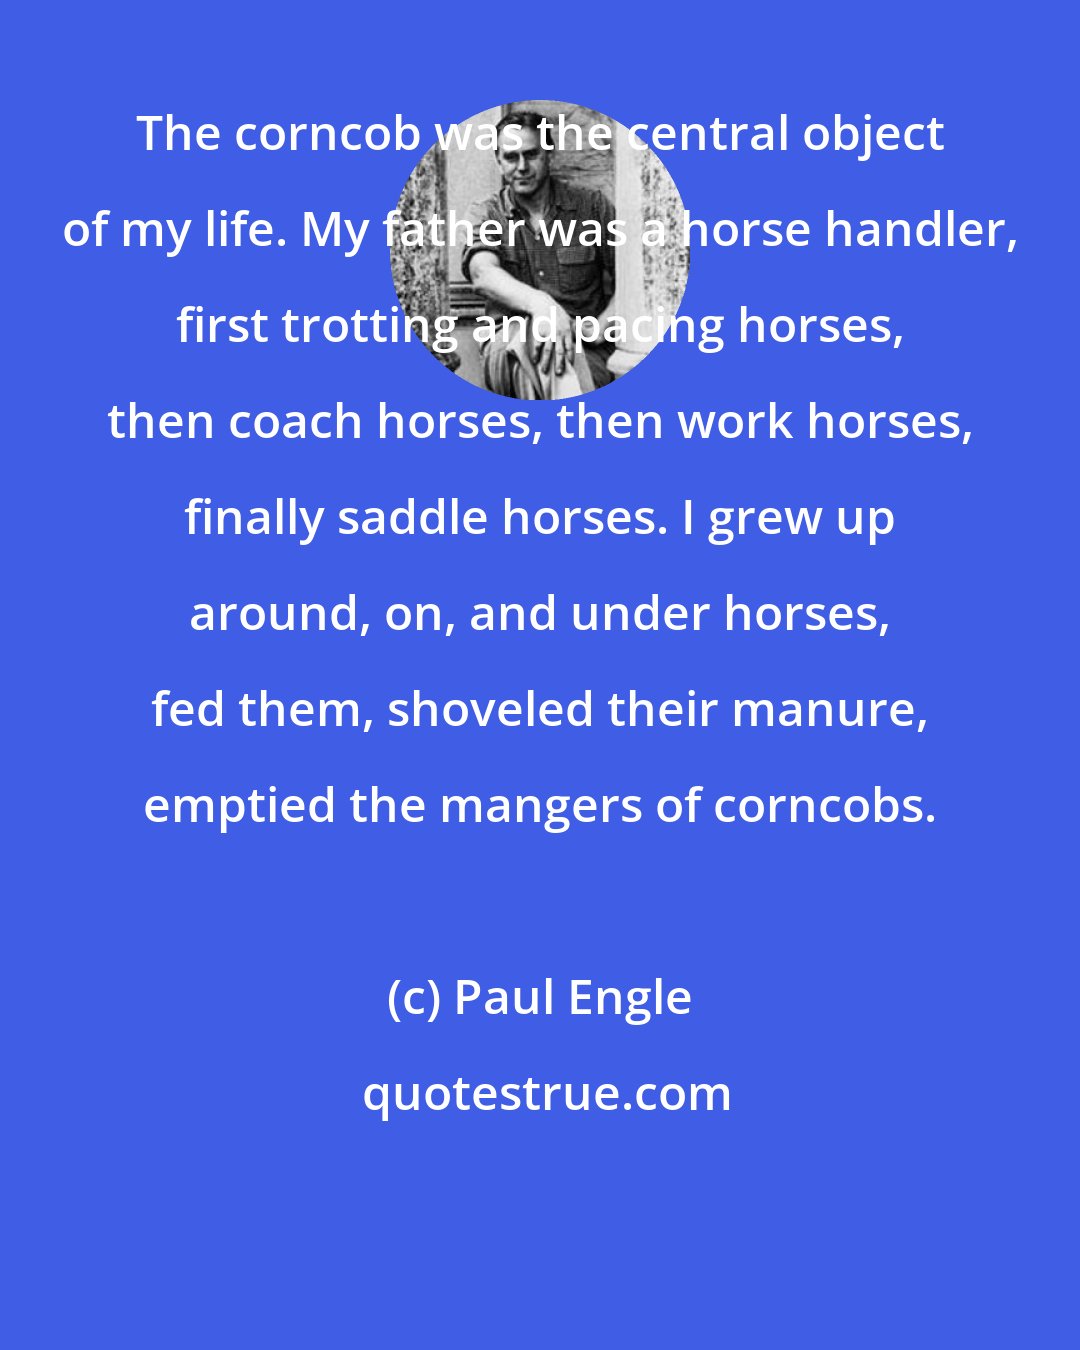 Paul Engle: The corncob was the central object of my life. My father was a horse handler, first trotting and pacing horses, then coach horses, then work horses, finally saddle horses. I grew up around, on, and under horses, fed them, shoveled their manure, emptied the mangers of corncobs.